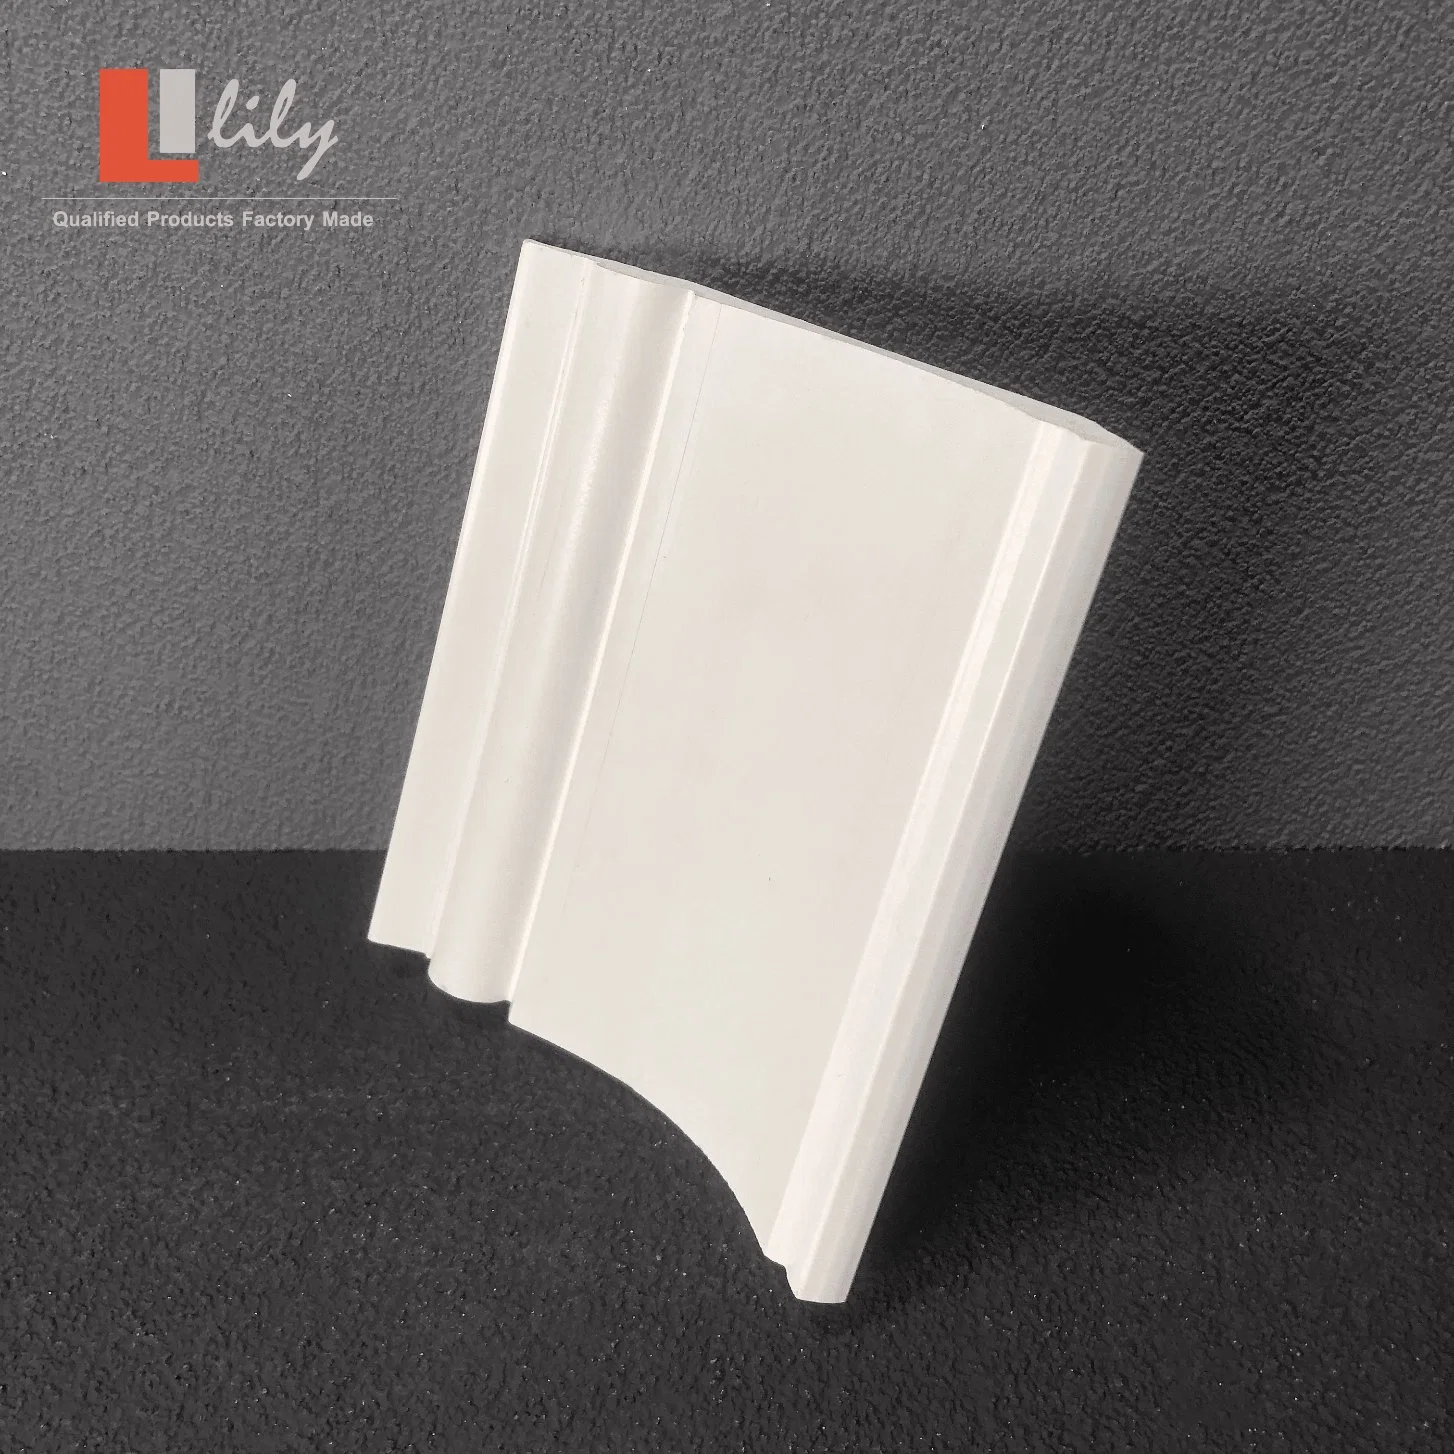 Lead-Free PVC Crown Mouldings for Interior and Exterior Decoration Building Material